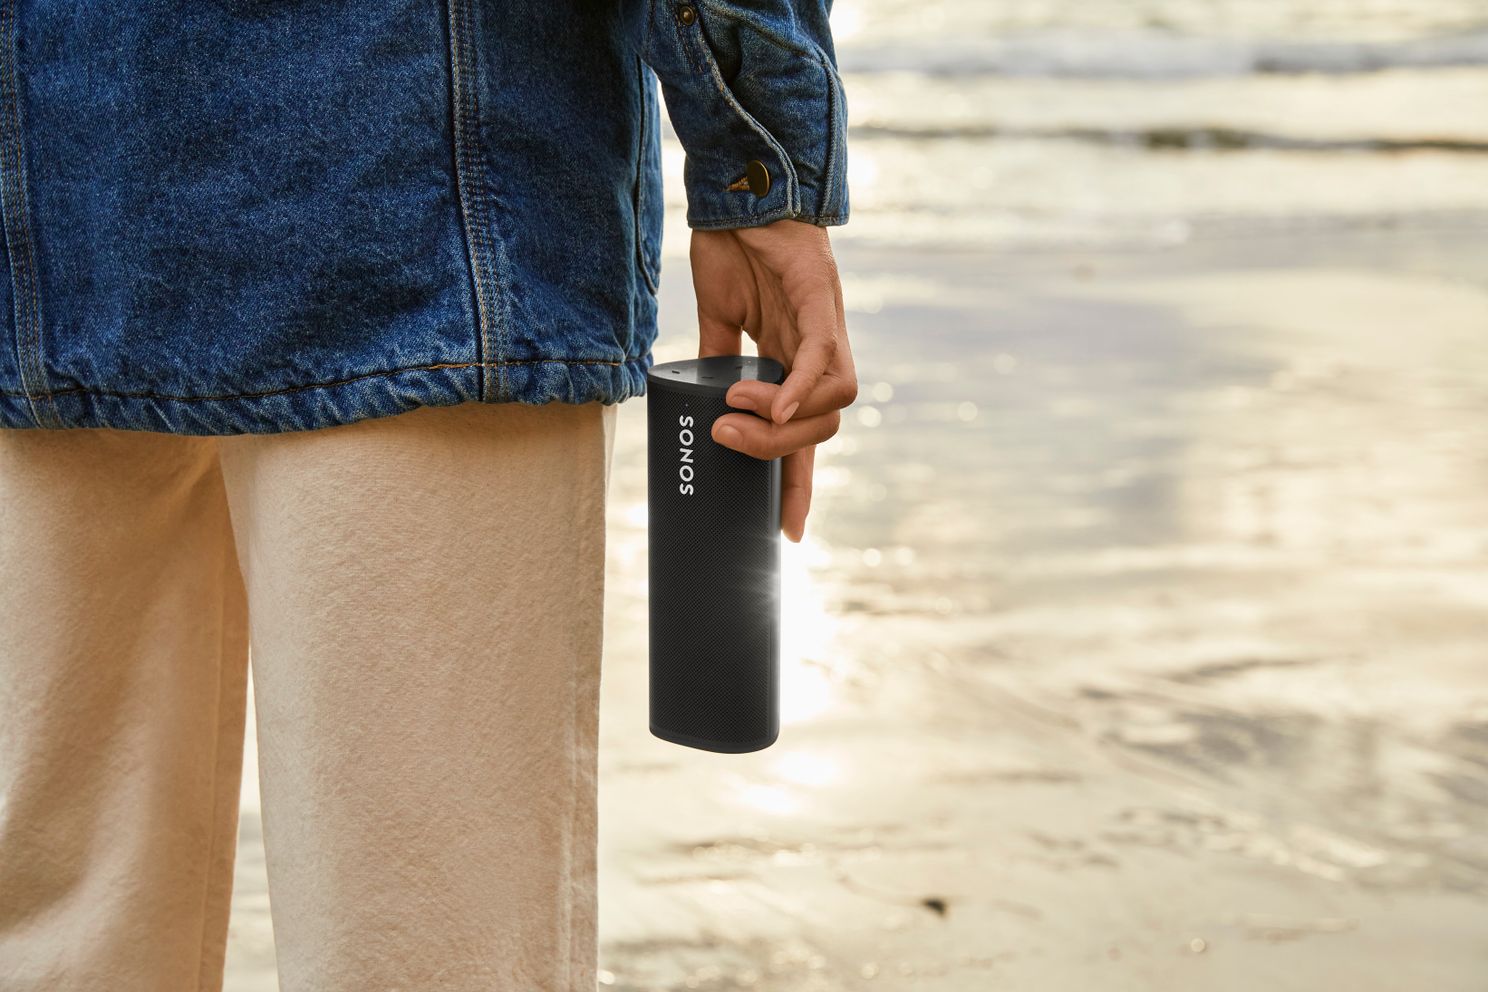 3 nice bluetooth speakers for on vacation